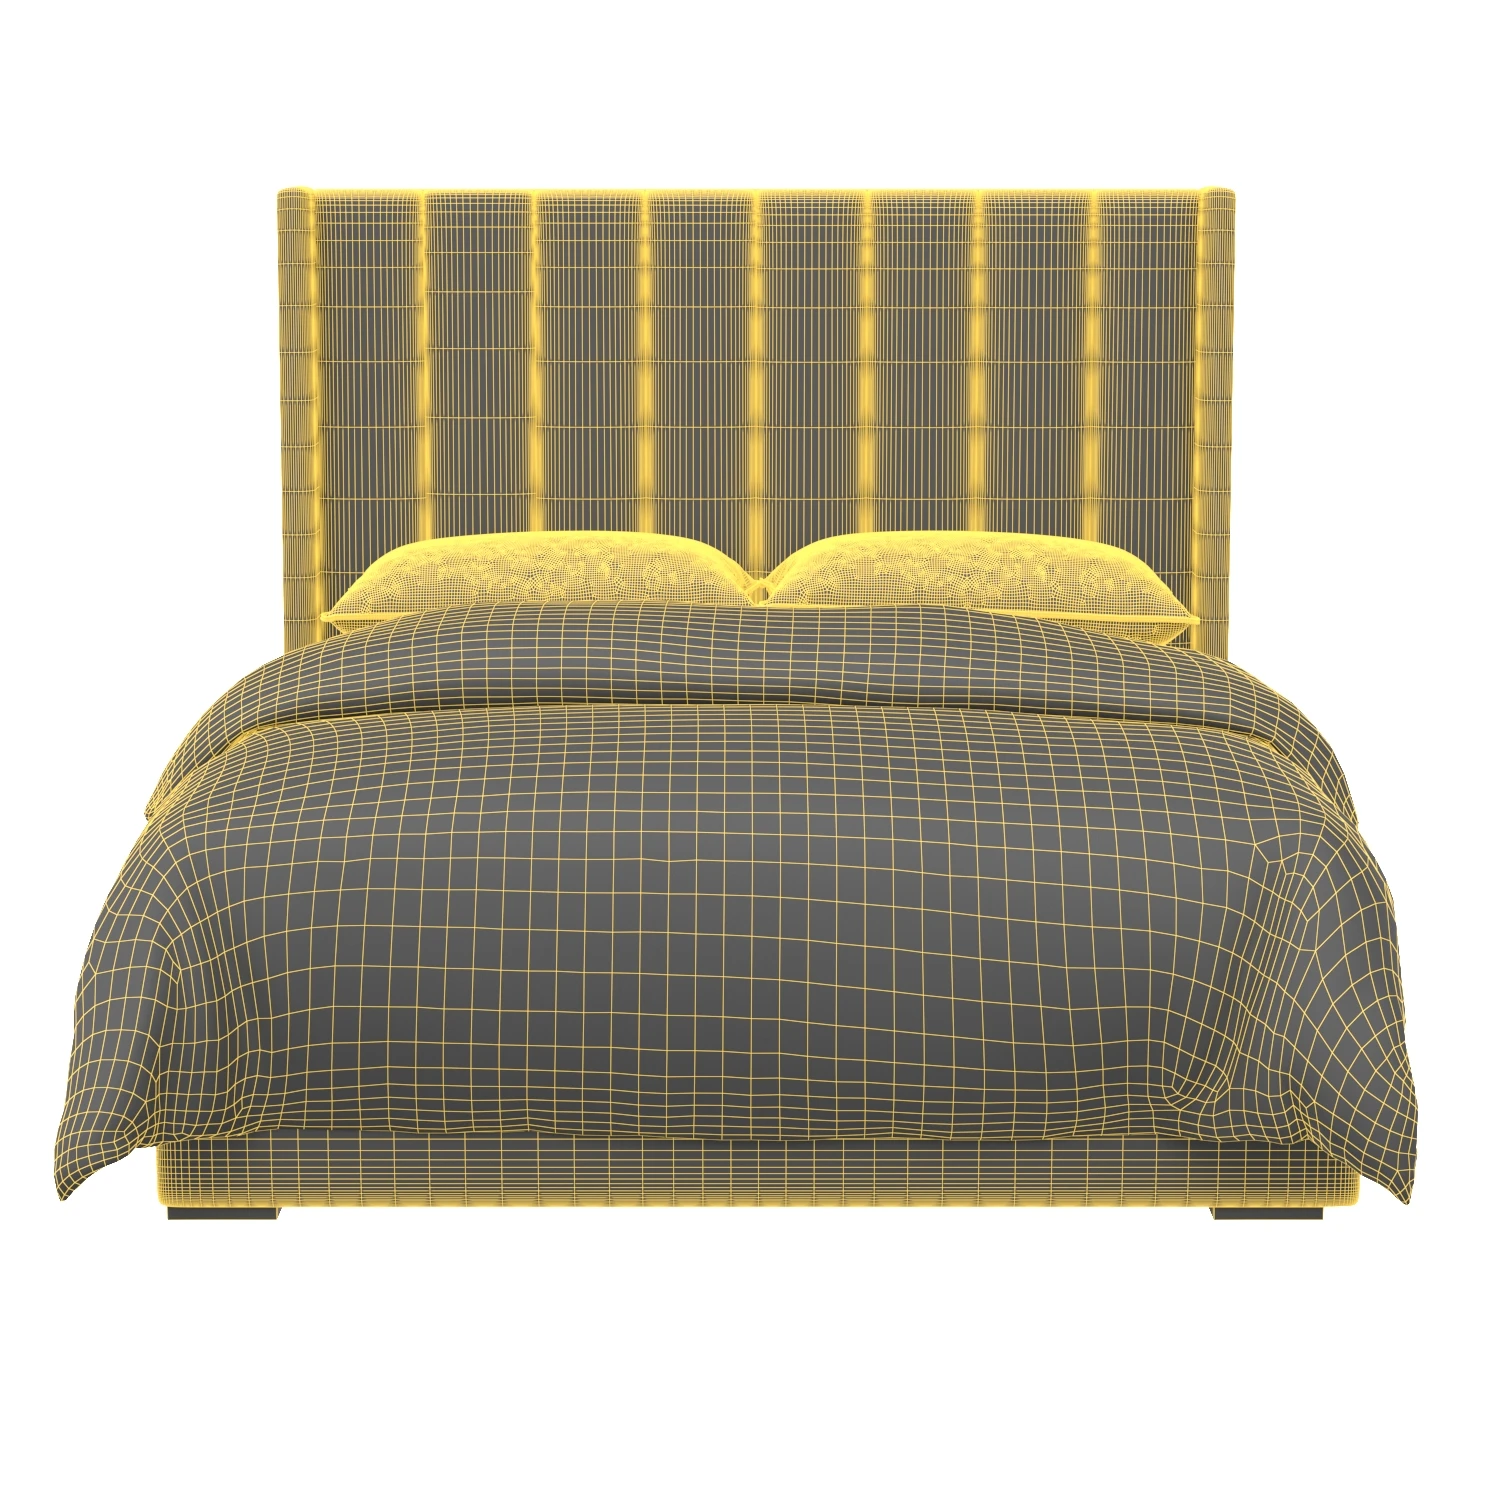 Modern Beds Collection 04 3D Model_08